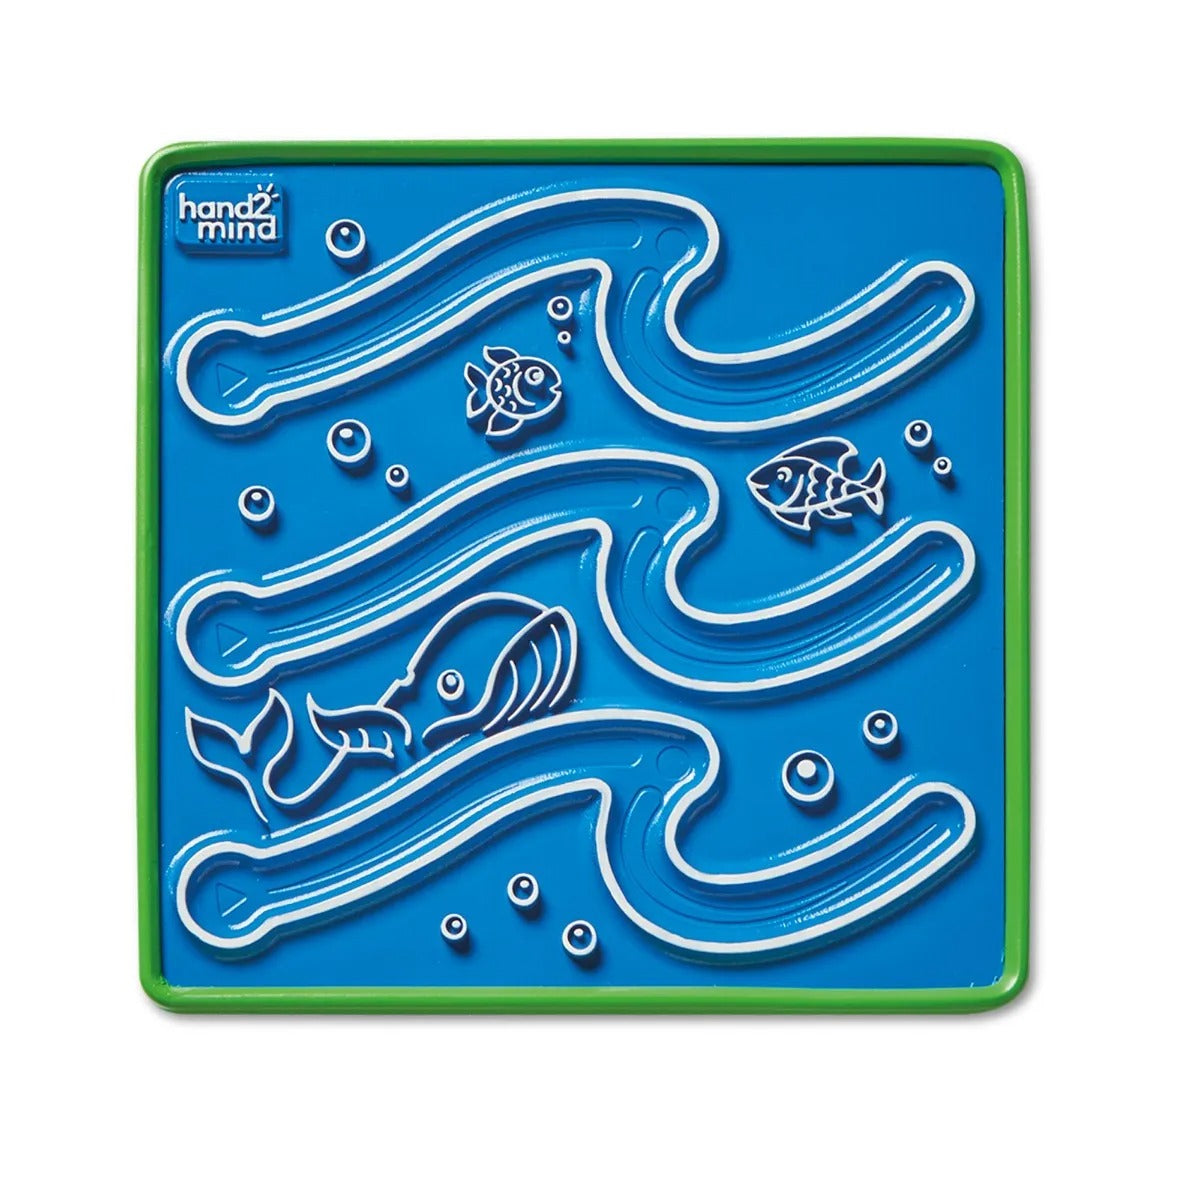 Mindful Maze Set, The Mindful Maze Set helps kids practise managing their emotions and cultivate mindfulness through 6 guided breathing exercises. The Mindful Maze Set comes with 3 double-sided boards that each have an engaging design. Children trace the designs with their fingers, breathing in and out as directed by the design of the board. Help children with social-emotional learning (SEL) using this set of boards developed to introduce mindful breathing for kids. The set of 3 double-sided boards offers 6